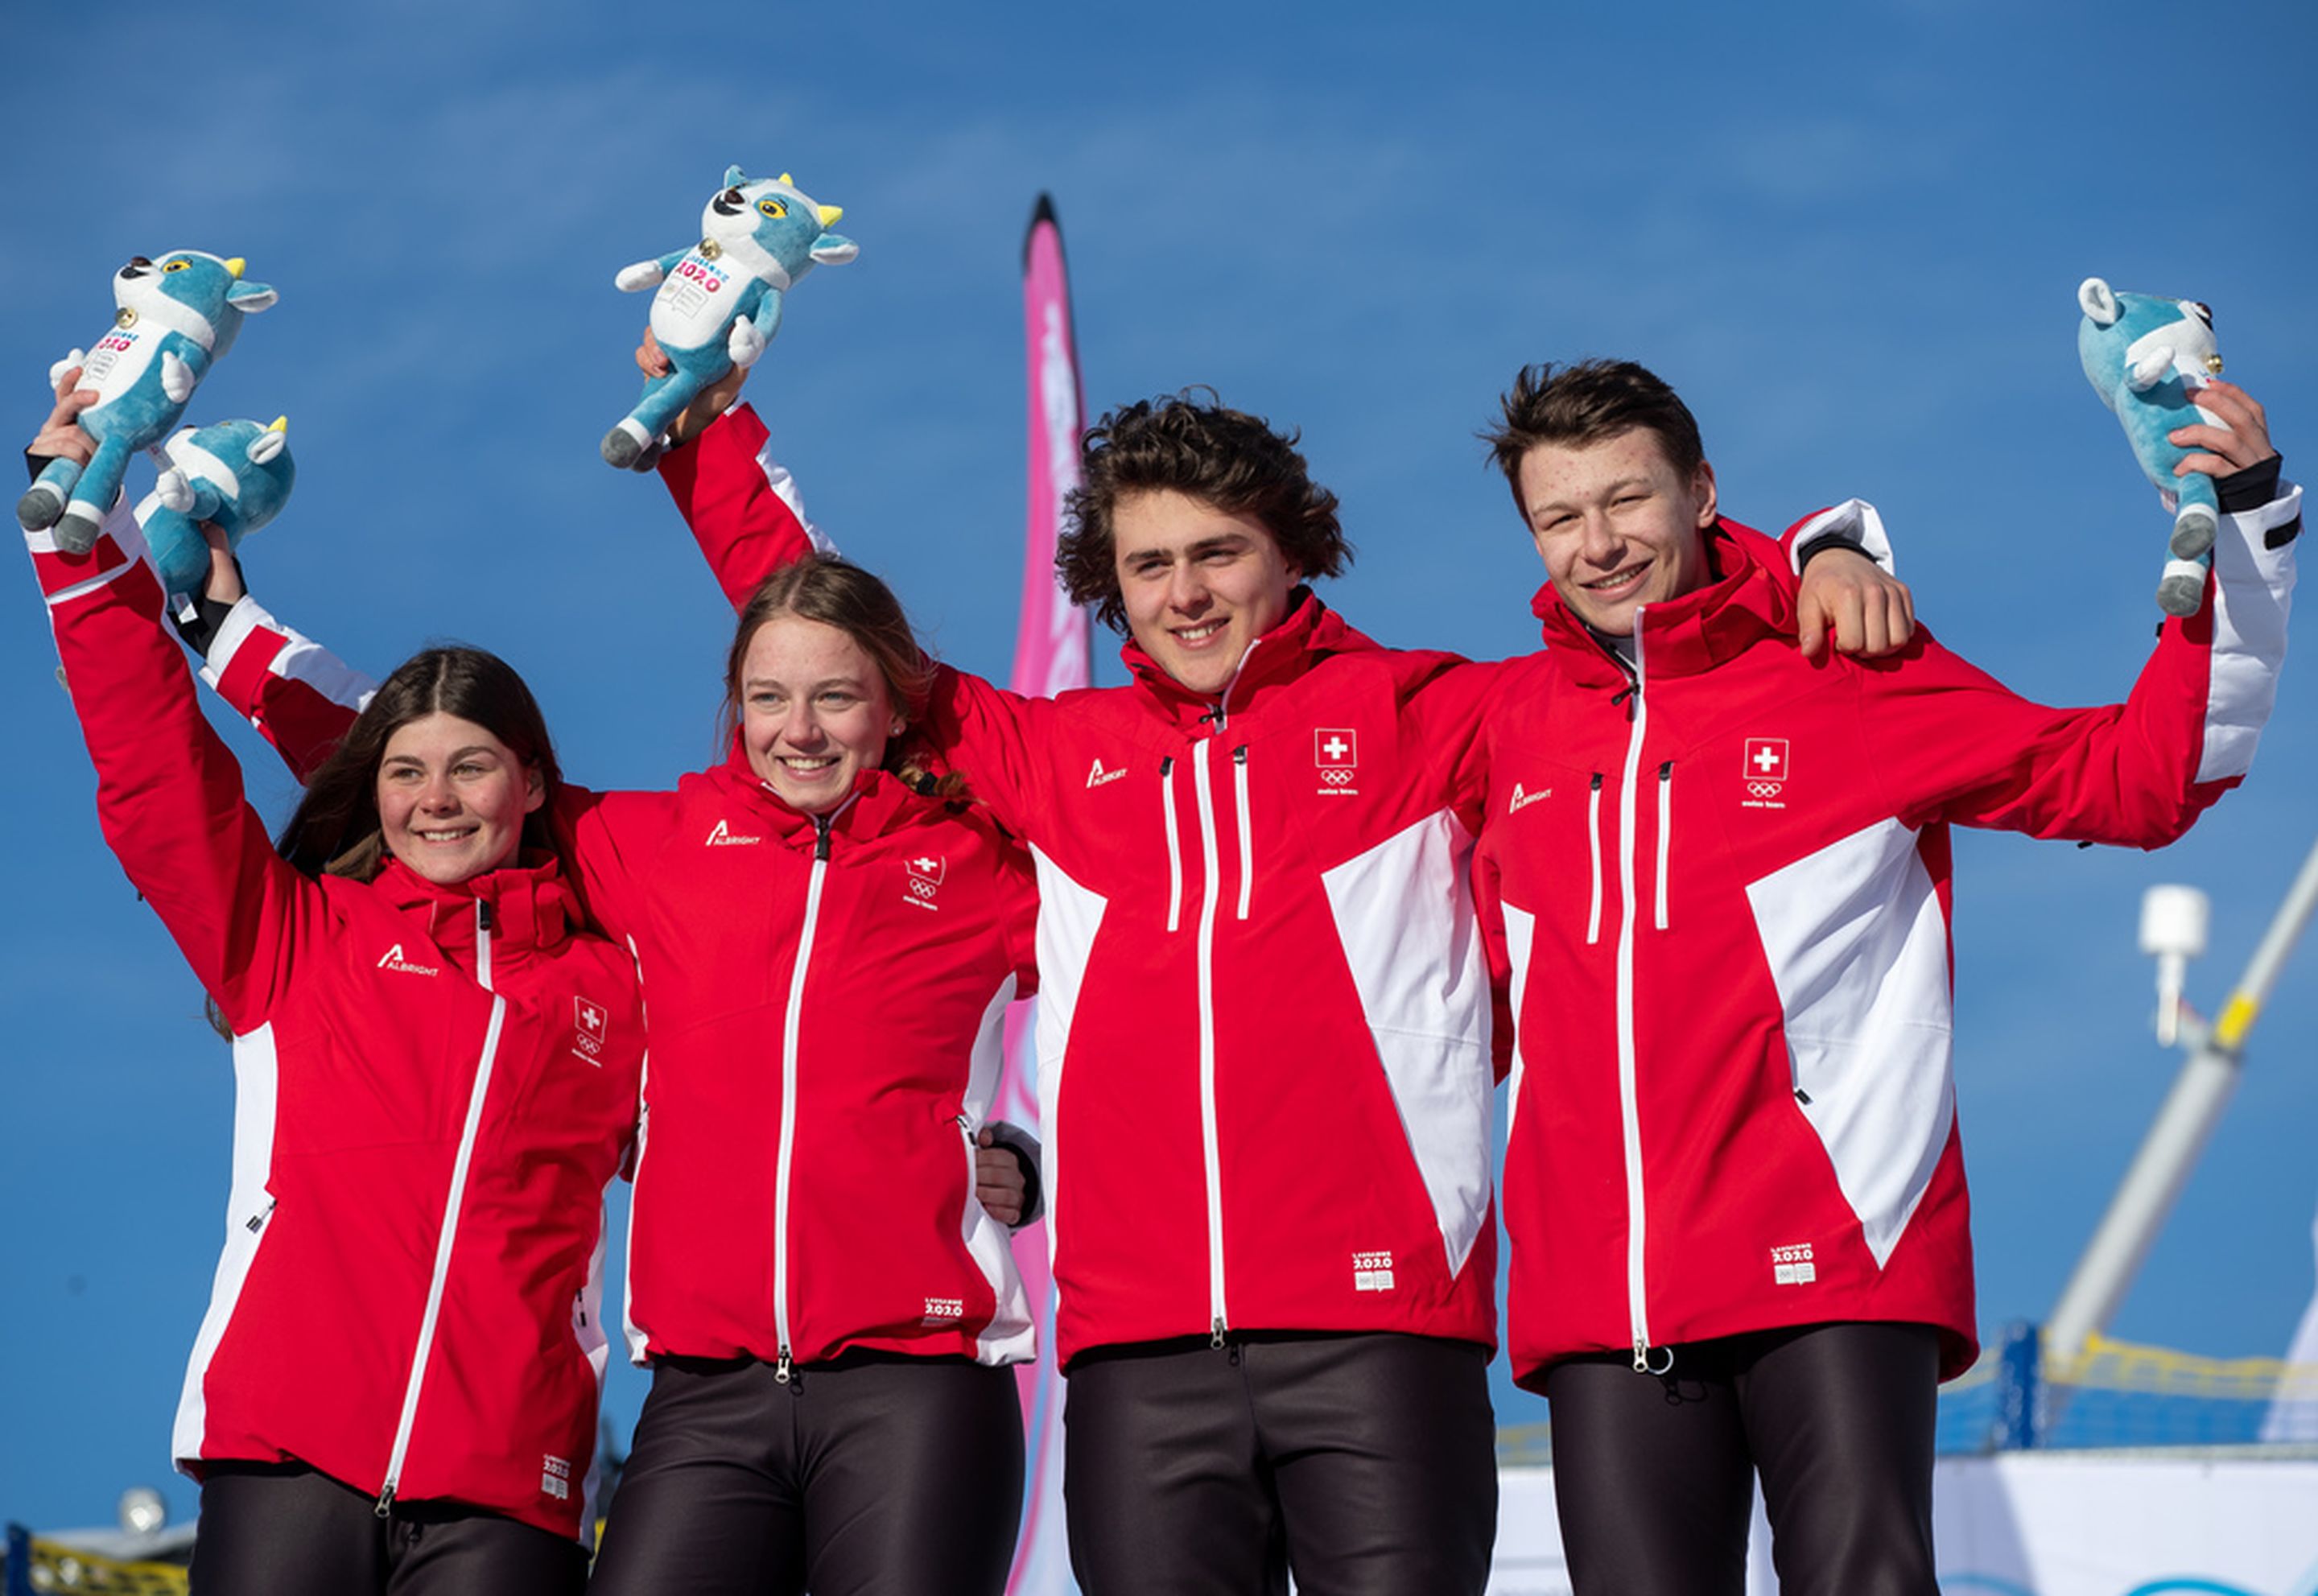 Anouk Doerig, Marie Krista, Valerio Jud and Robin Tissieres celebrate their gold medals at the Mascot Ceremony for the Team Ski-Snowboard Cross at Lausanne 2020 YOG © IOS